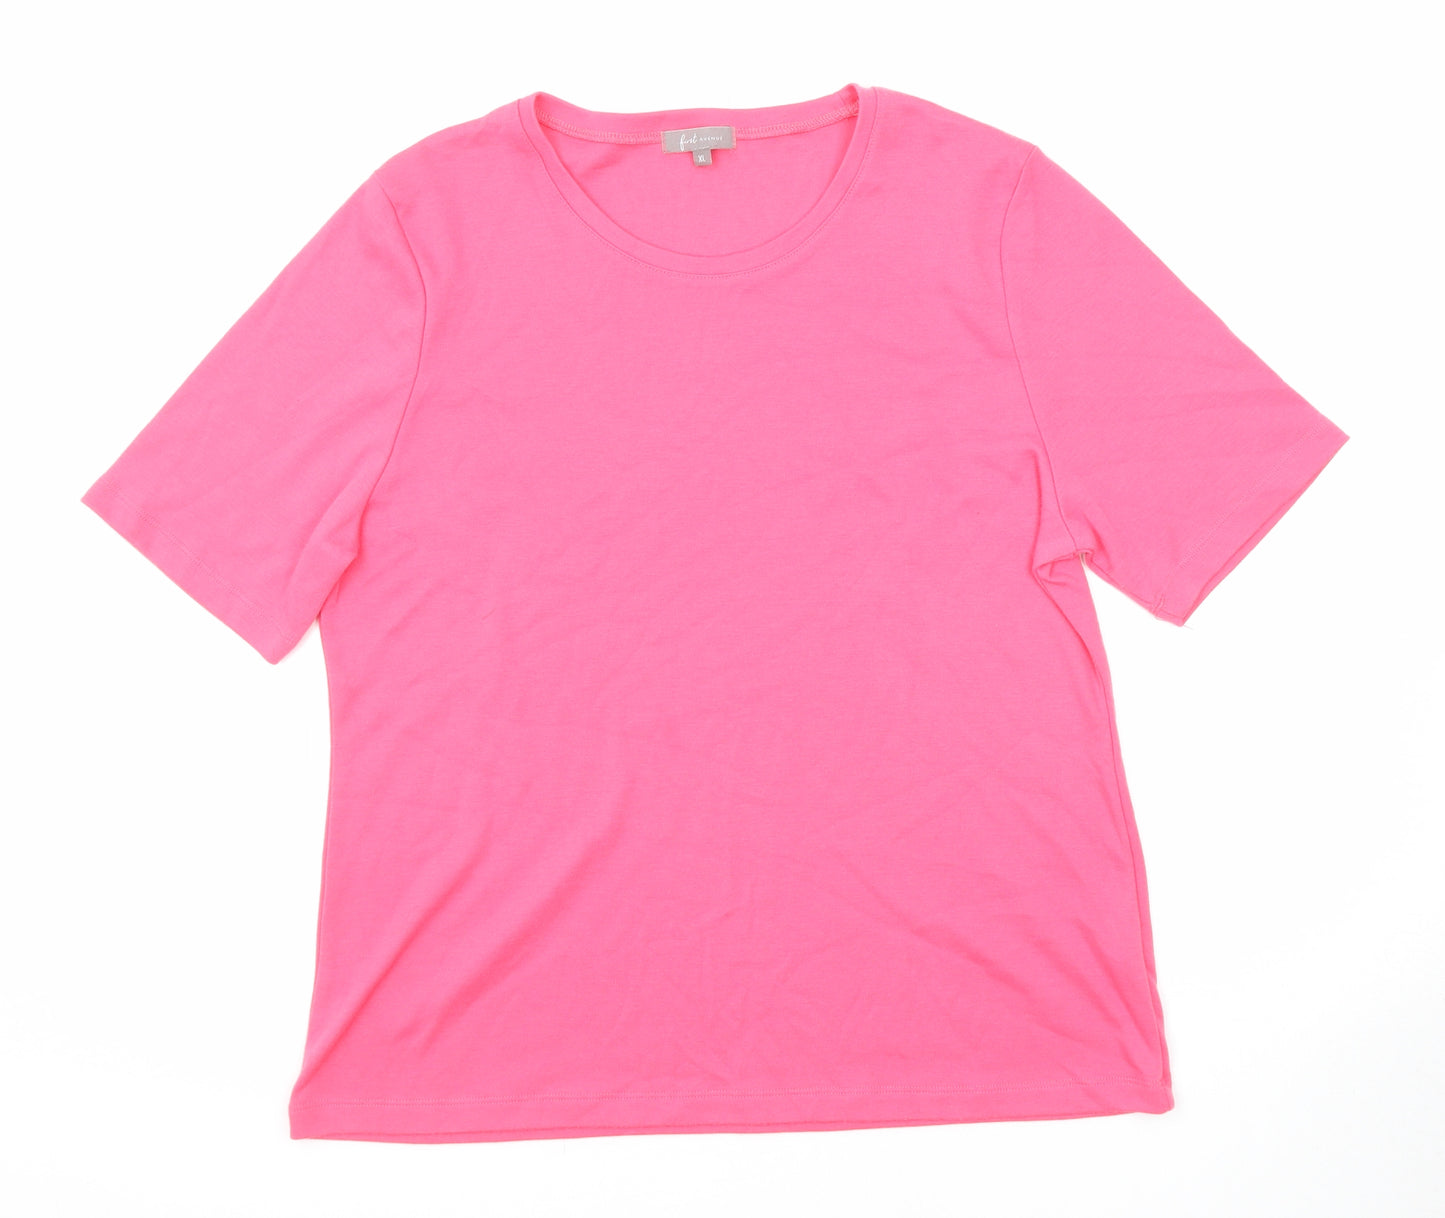 First Avenue Womens Pink Polyester Basic T-Shirt Size XL Round Neck